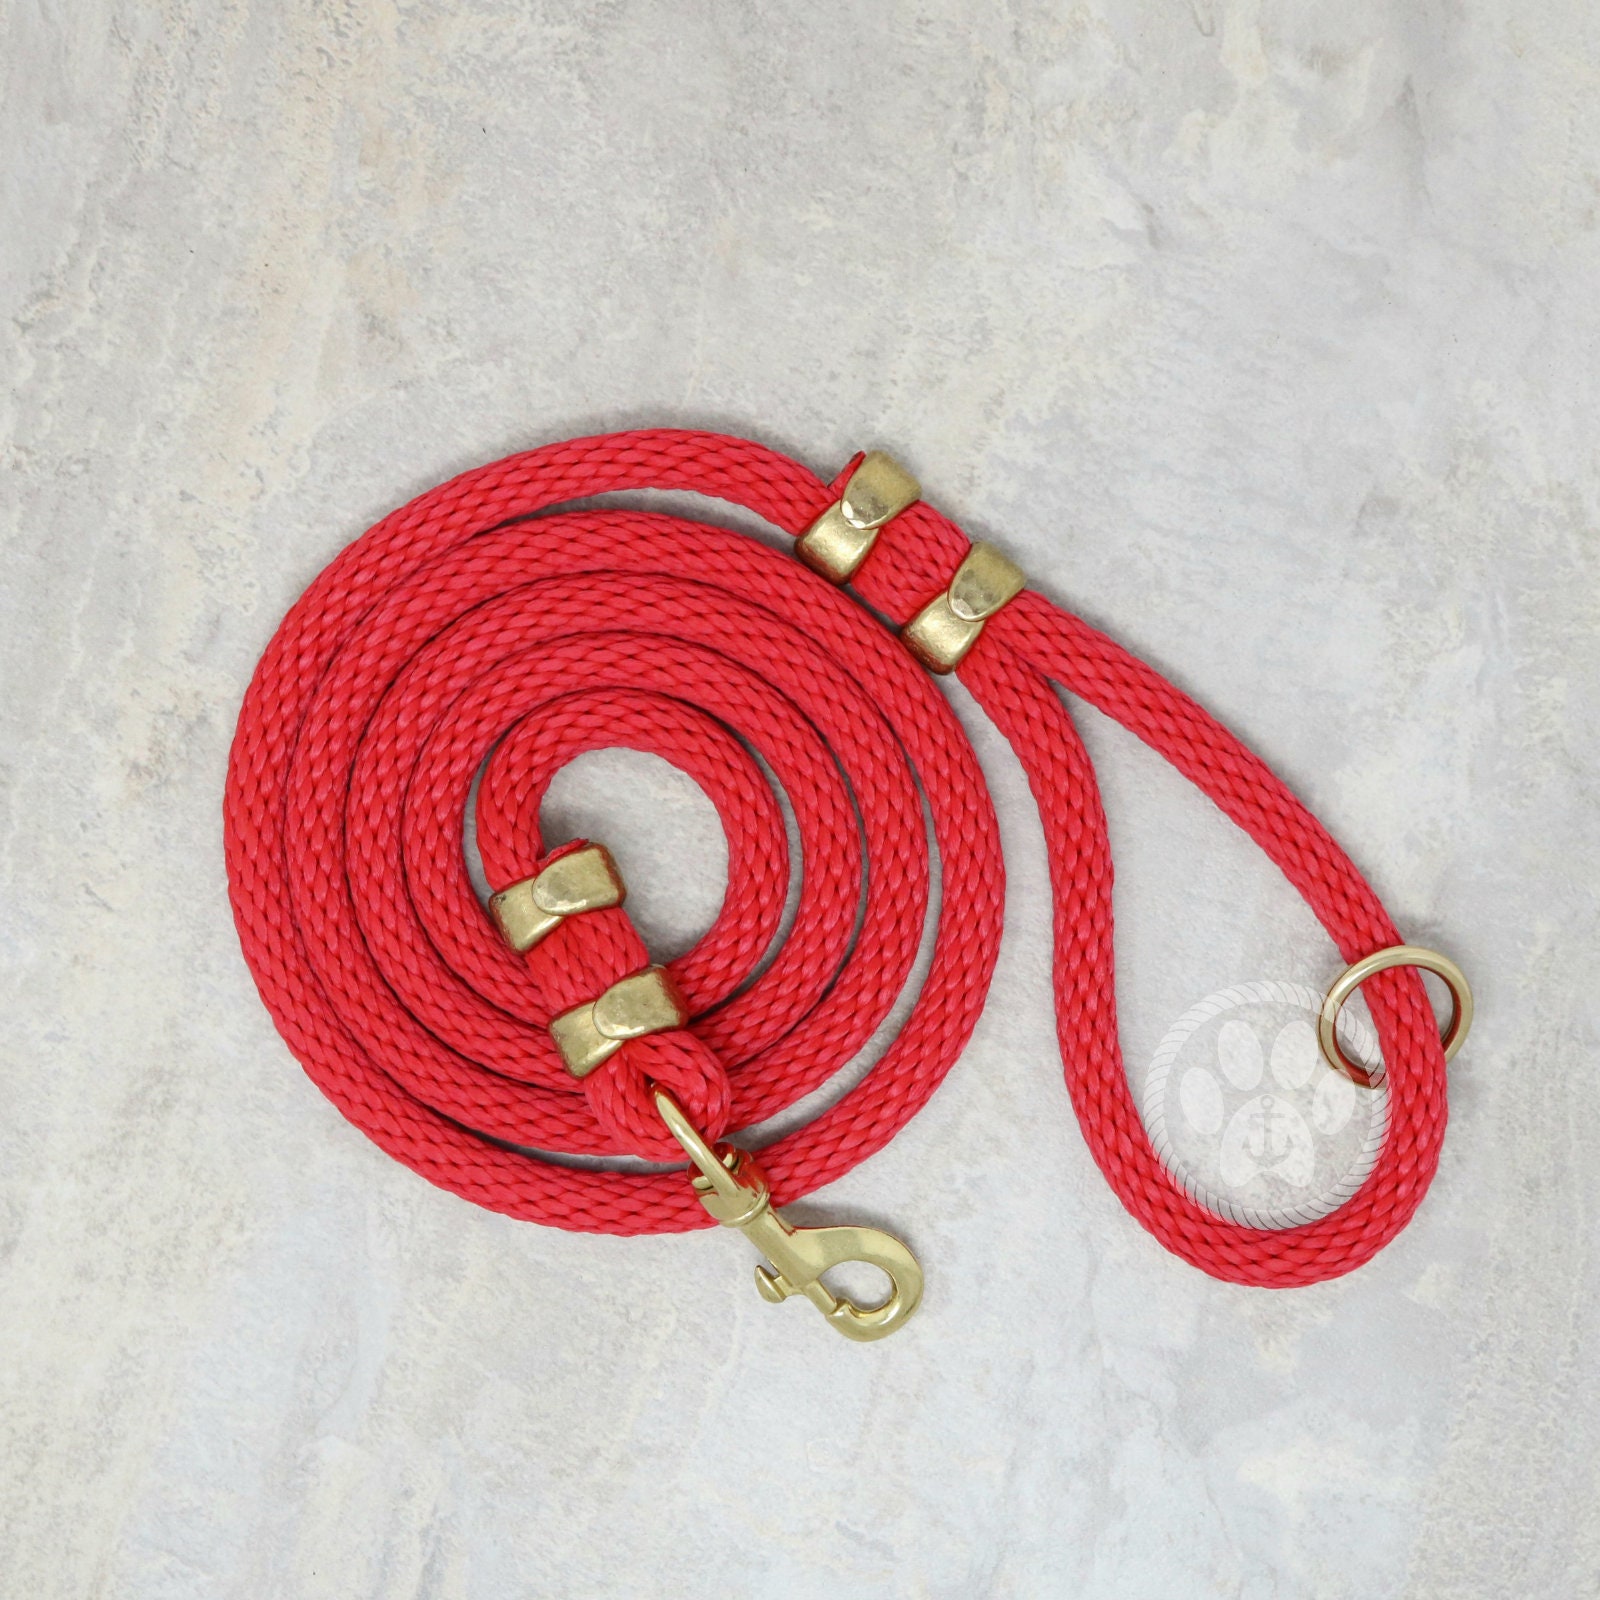 Rope Bell Pull w/ Brass Shackle - Braided Knot Lanyard - Hand Tied Sailor  Bellpull - White or Natural